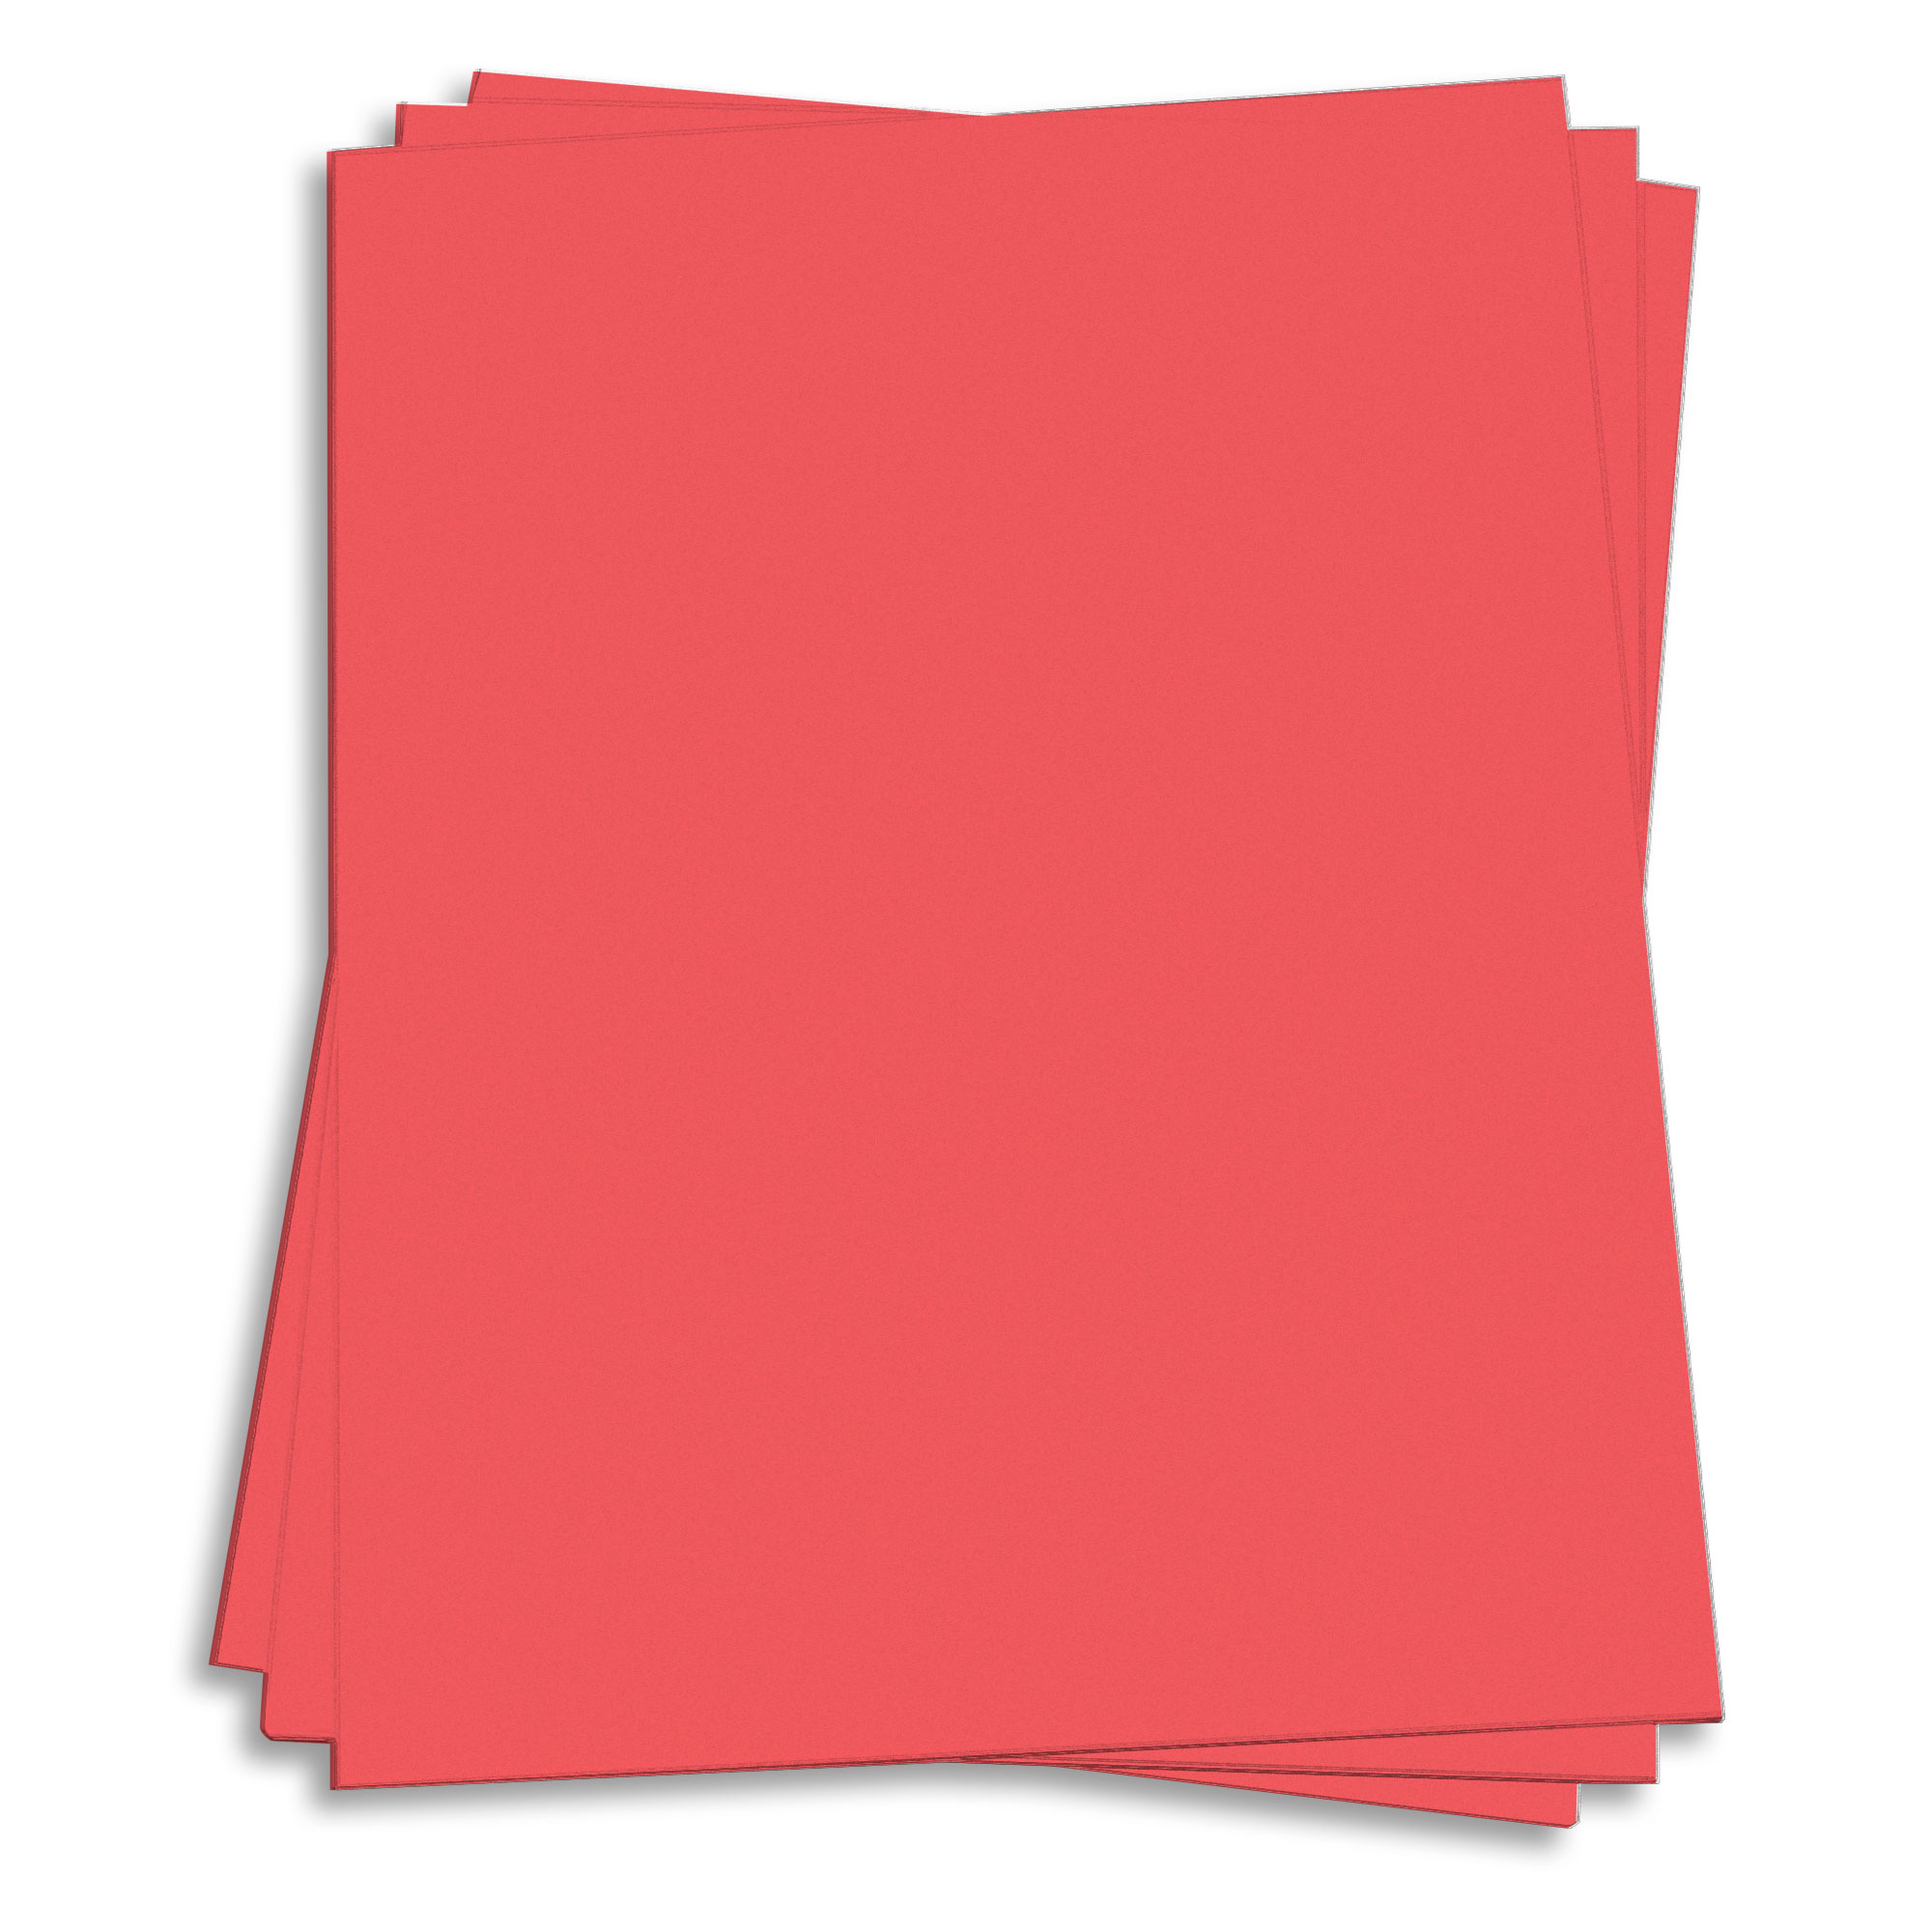 Rocket Red Card Stock - 8 1/2 x 11 65lb Cover